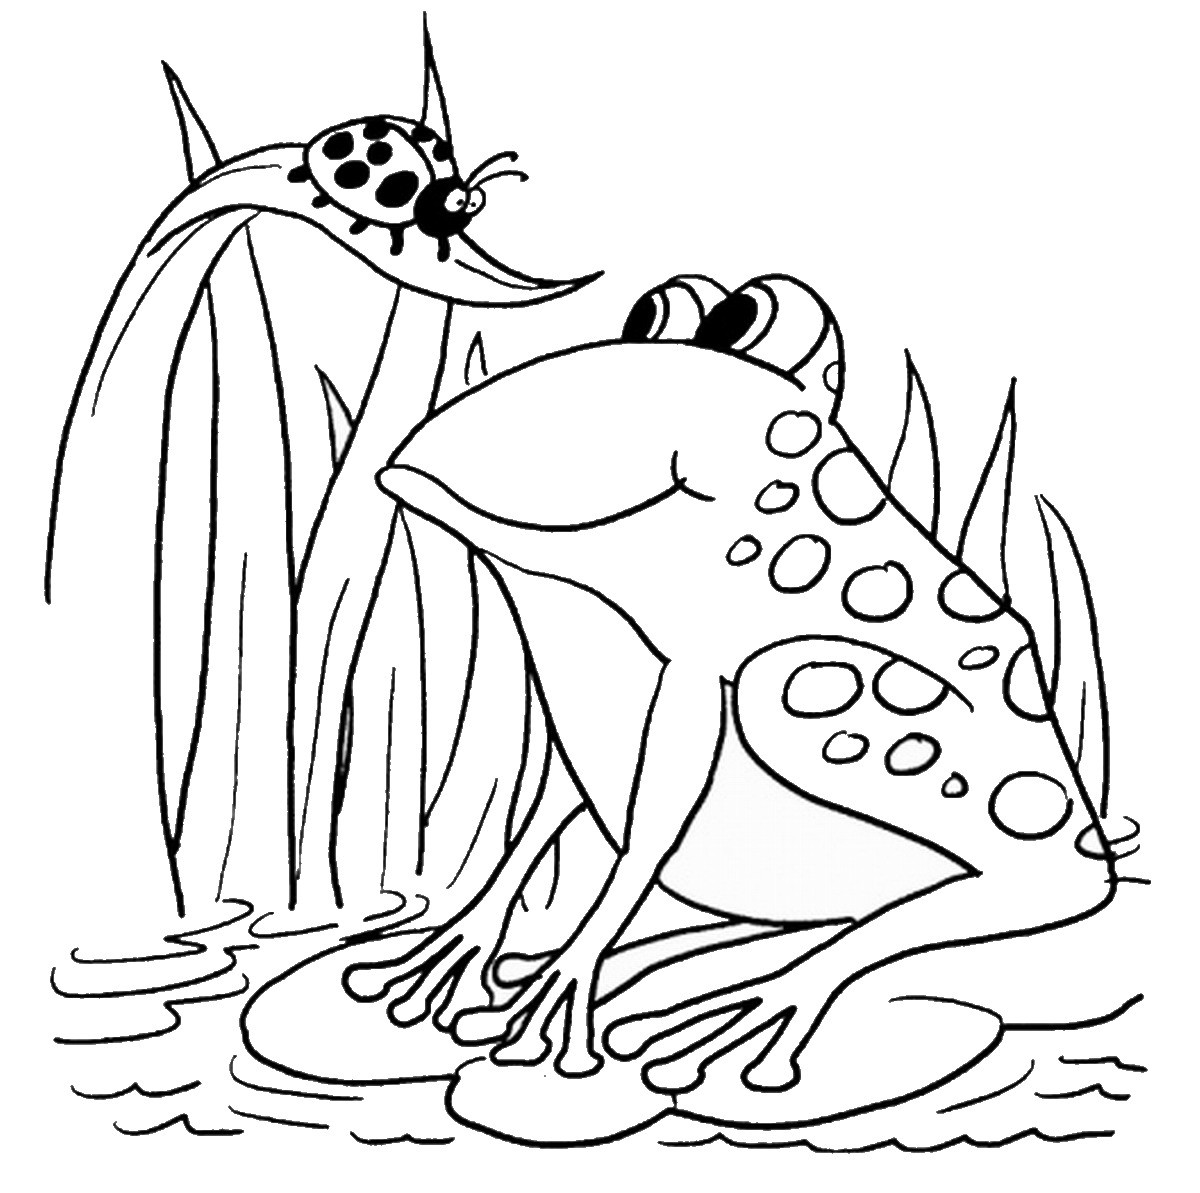 Frog Coloring Pages For Kids
 Frog Coloring Pages